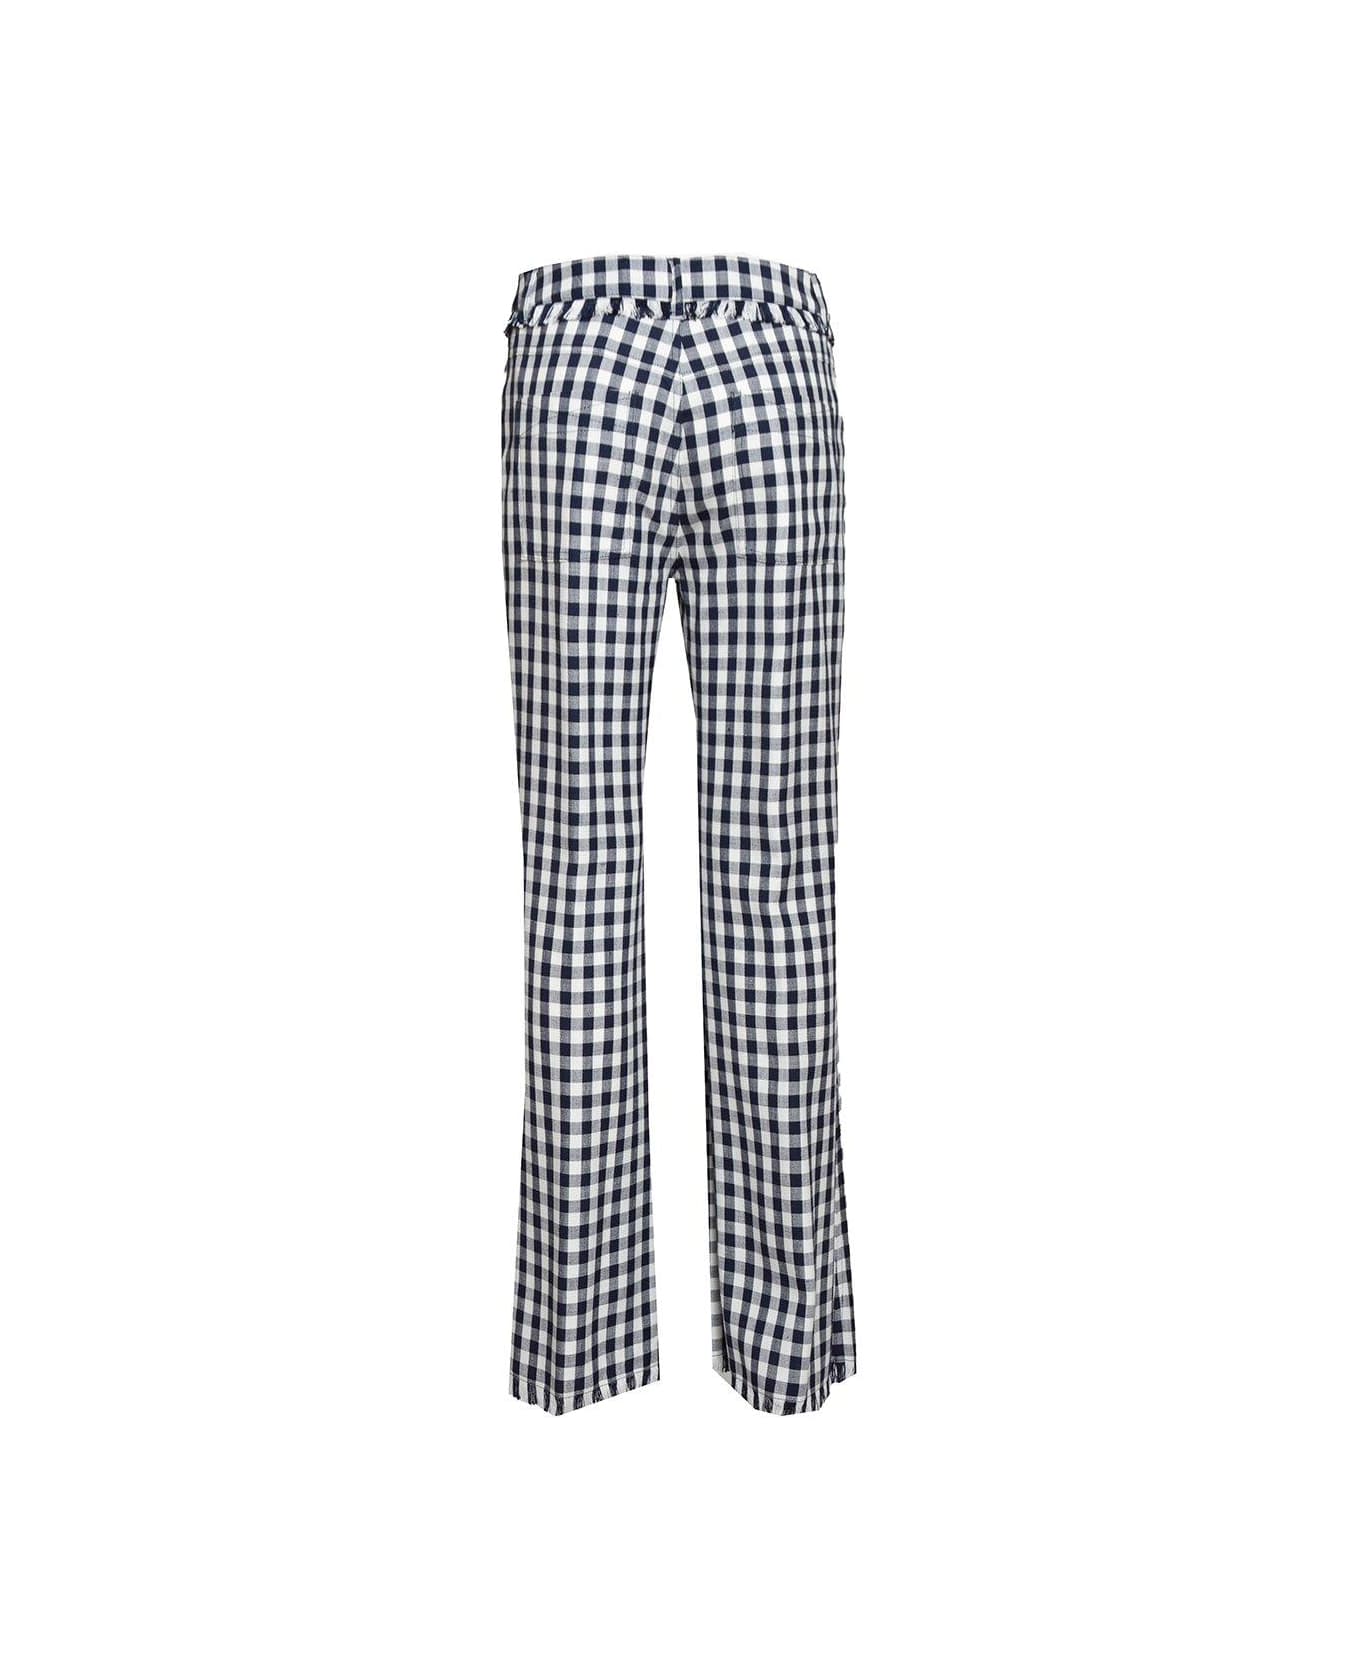 Etro Mid Rise Gingham Checked Trousers - Bianco/nero ボトムス